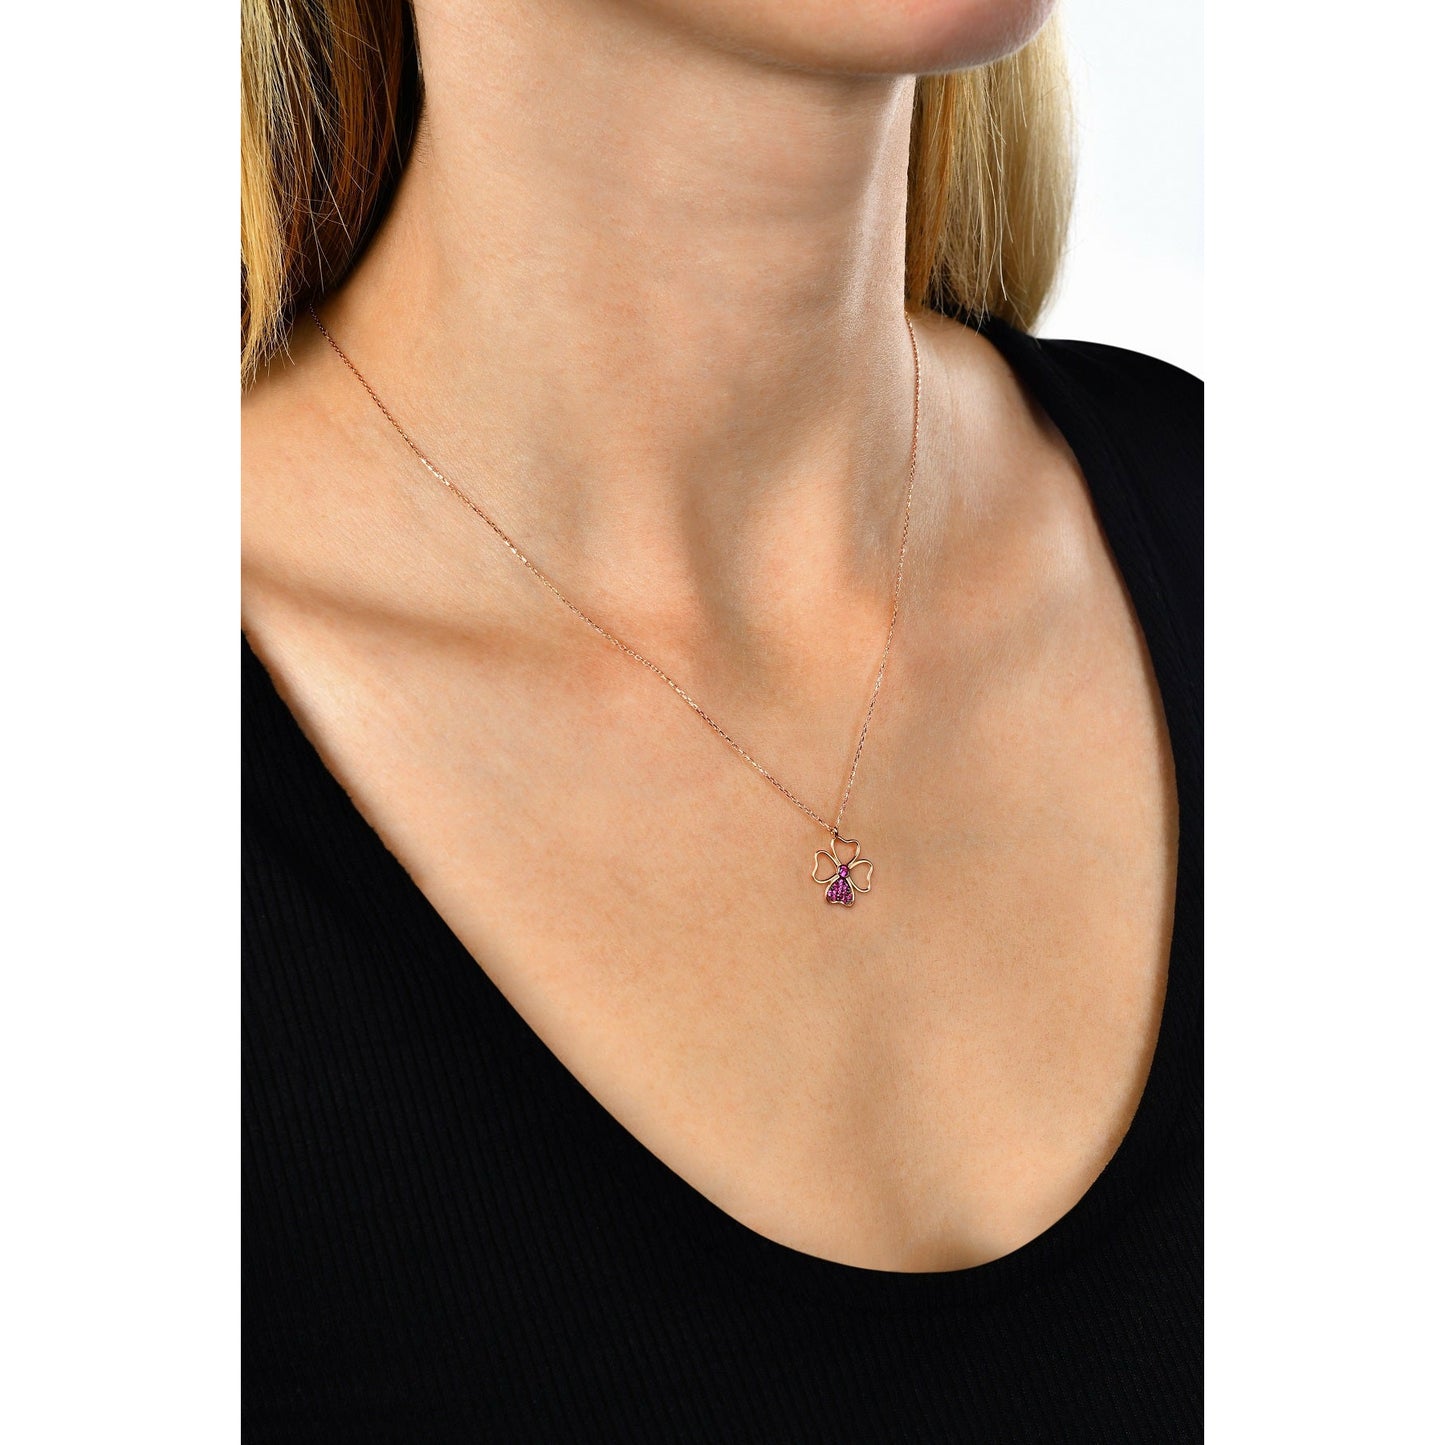 14K Gold Clover Necklace with Gift Stone